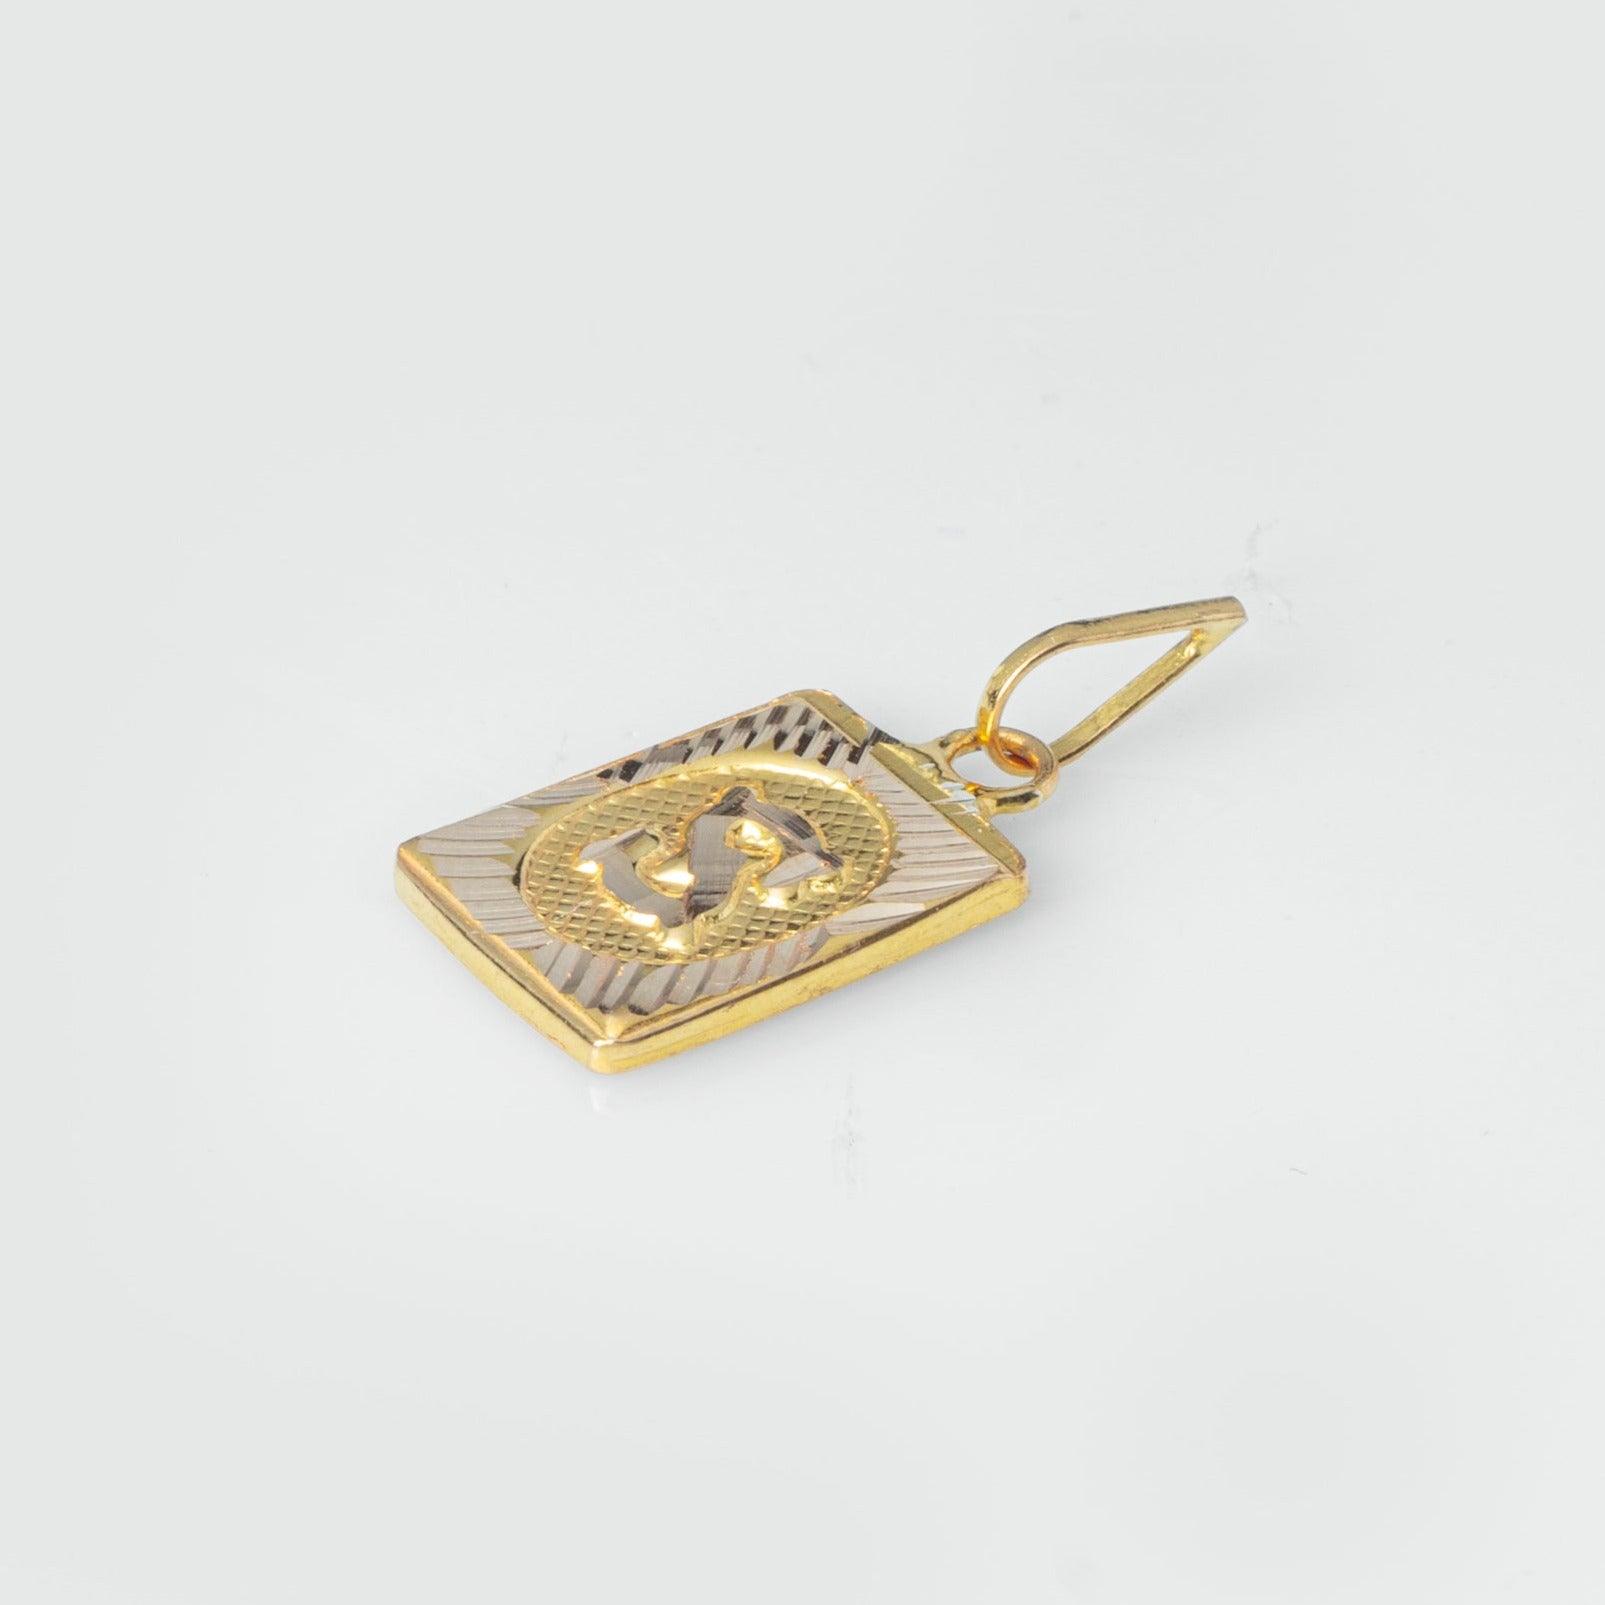 'S' 22ct Gold Initial Pendant P-7495-S - Minar Jewellers